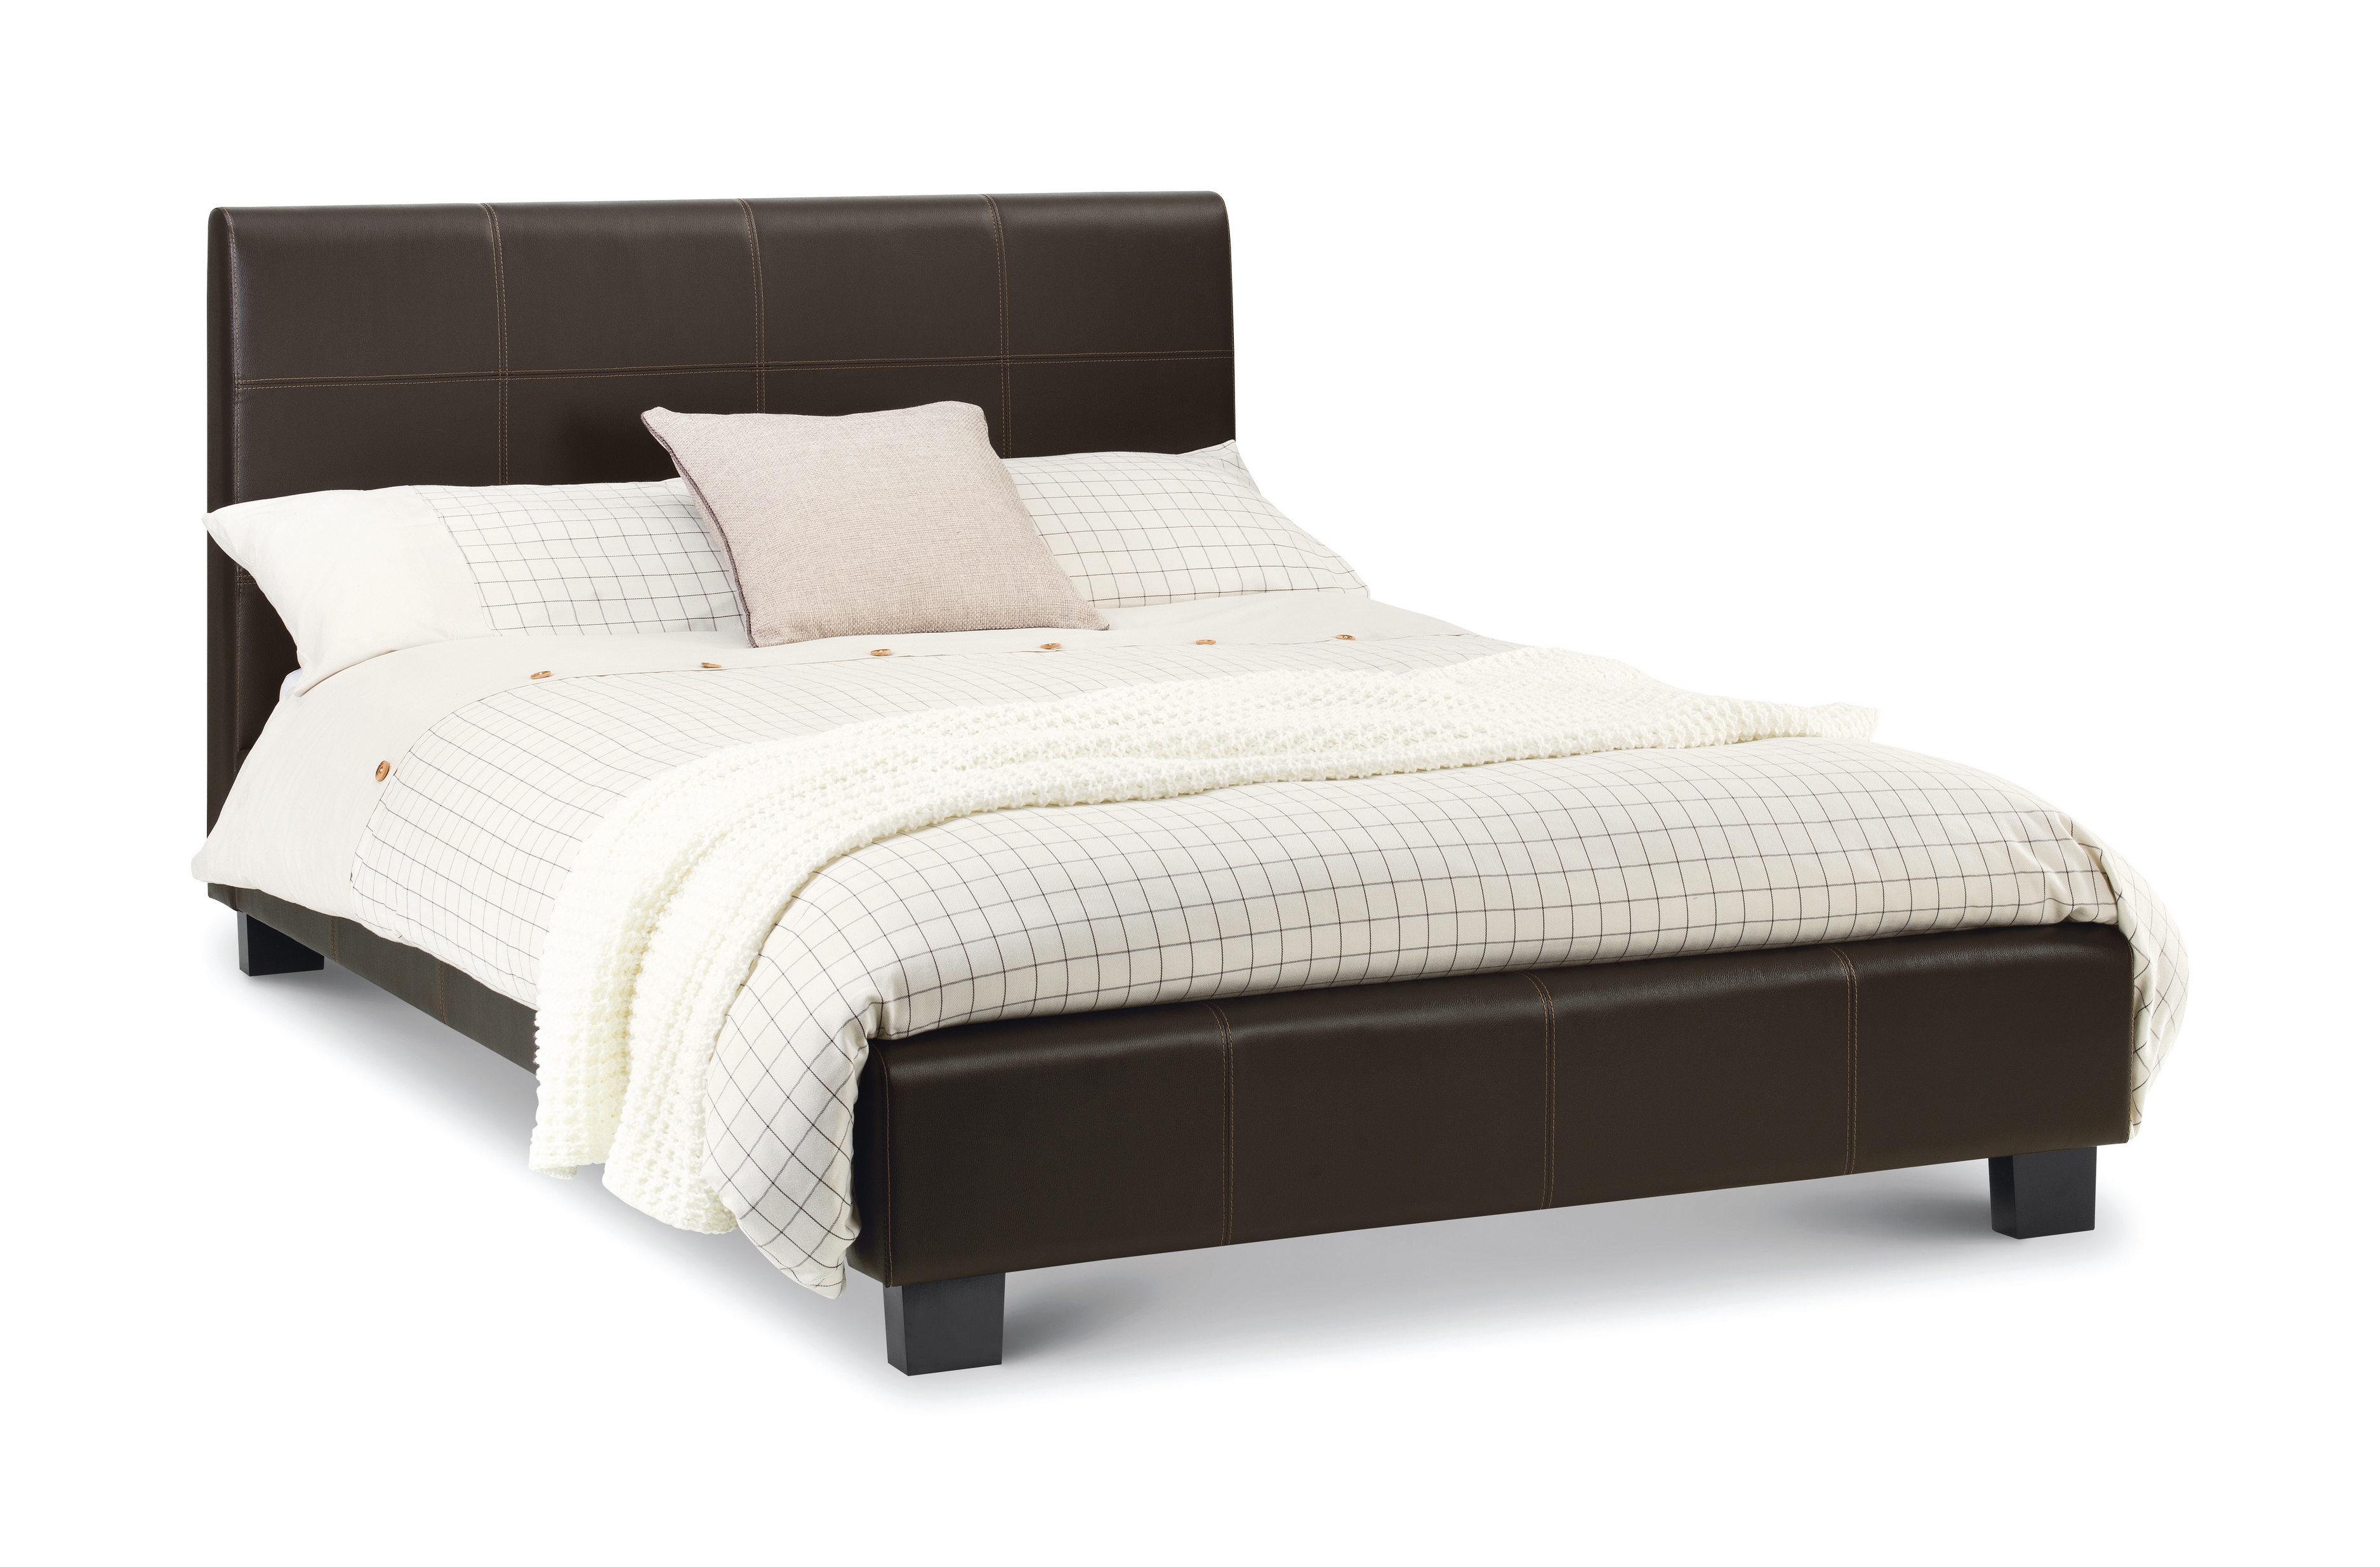 Beds Padded Brown Faux Leather Bed Frame - Small Double 4ft - Free Next Day Or Day Of Choice Delivery*